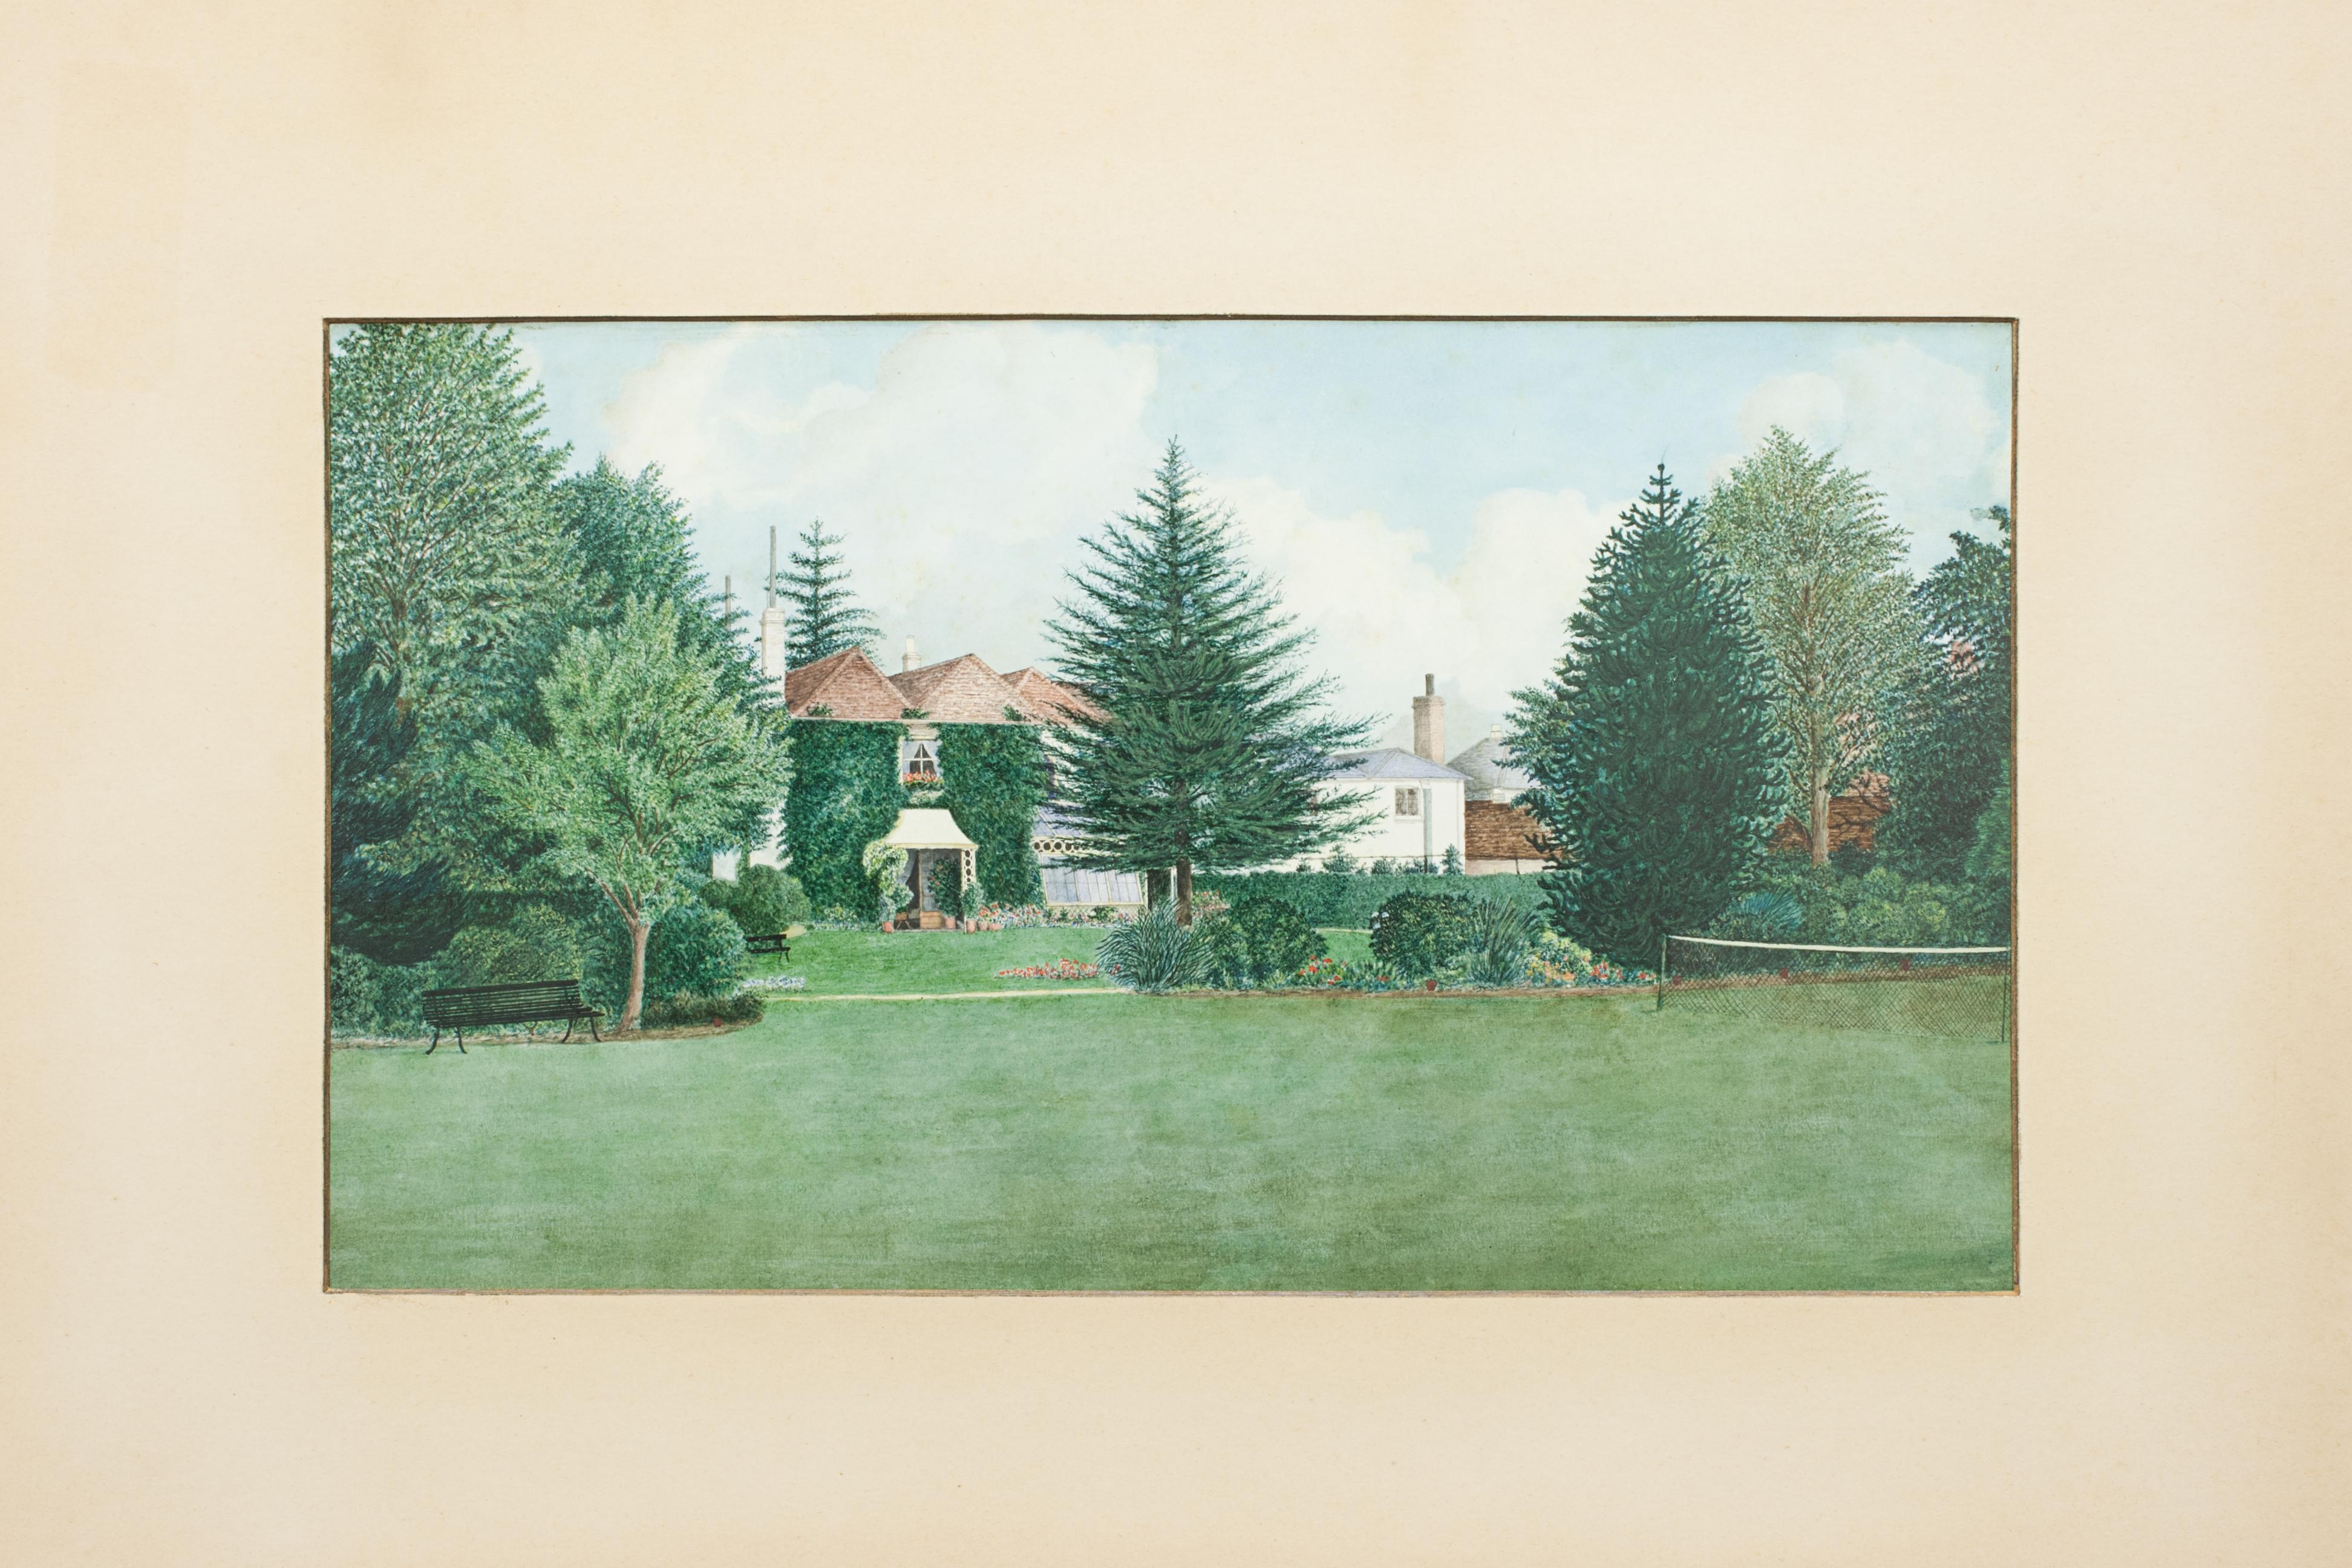 Tennis watercolour painting.
A wonderful atmospheric watercolour of a country house's rear garden with well established trees and a grass tennis court. The tennis net can be seen coming into the picture from the right. It is a well accomplished